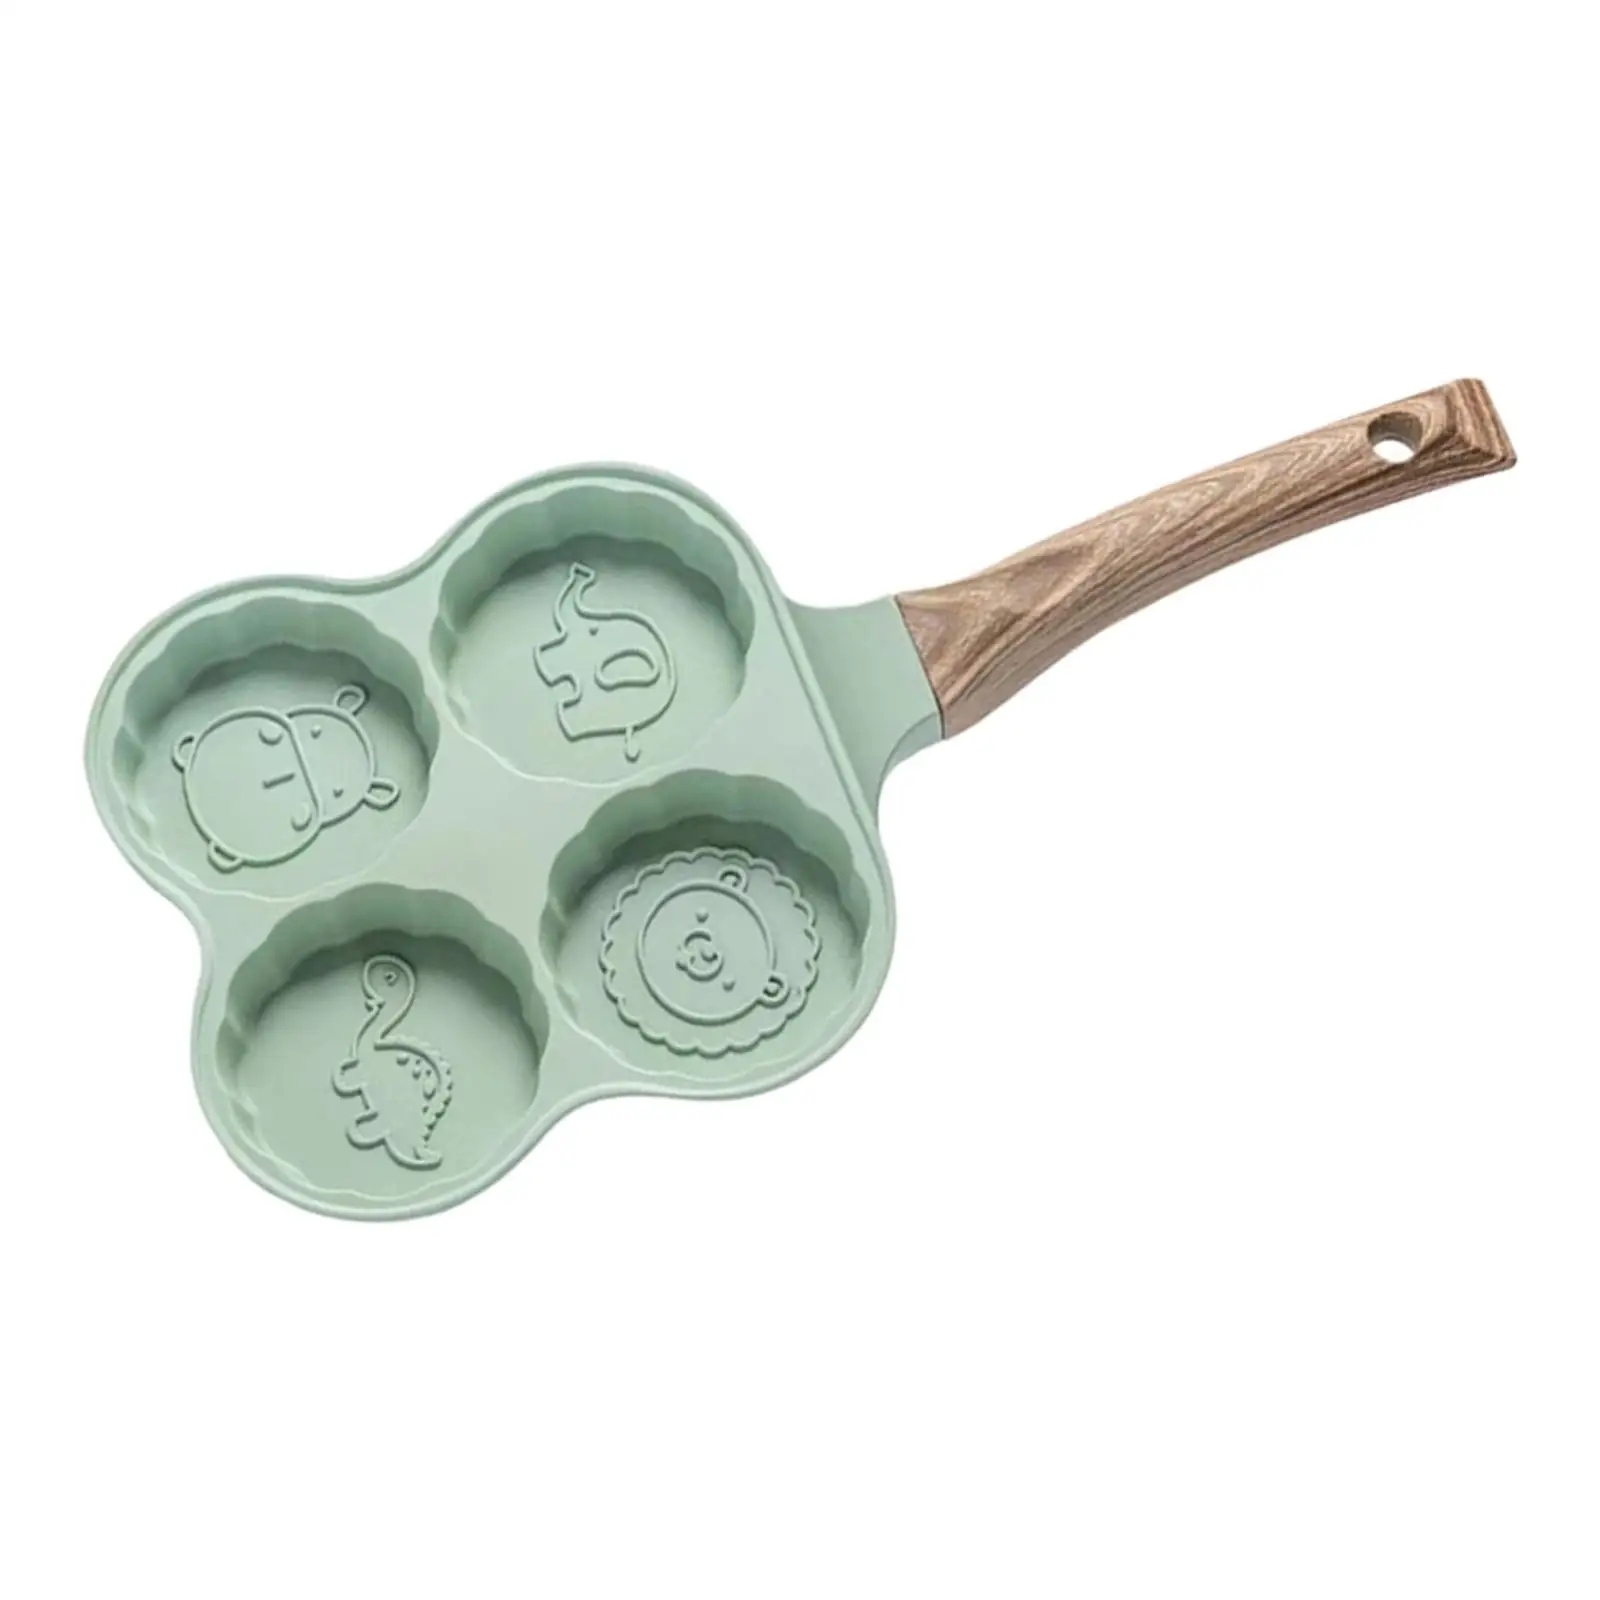 Mini Frying Egg Pans Cookware,Wooden Handle Skillet Omelet Pan,Small Frying Pan